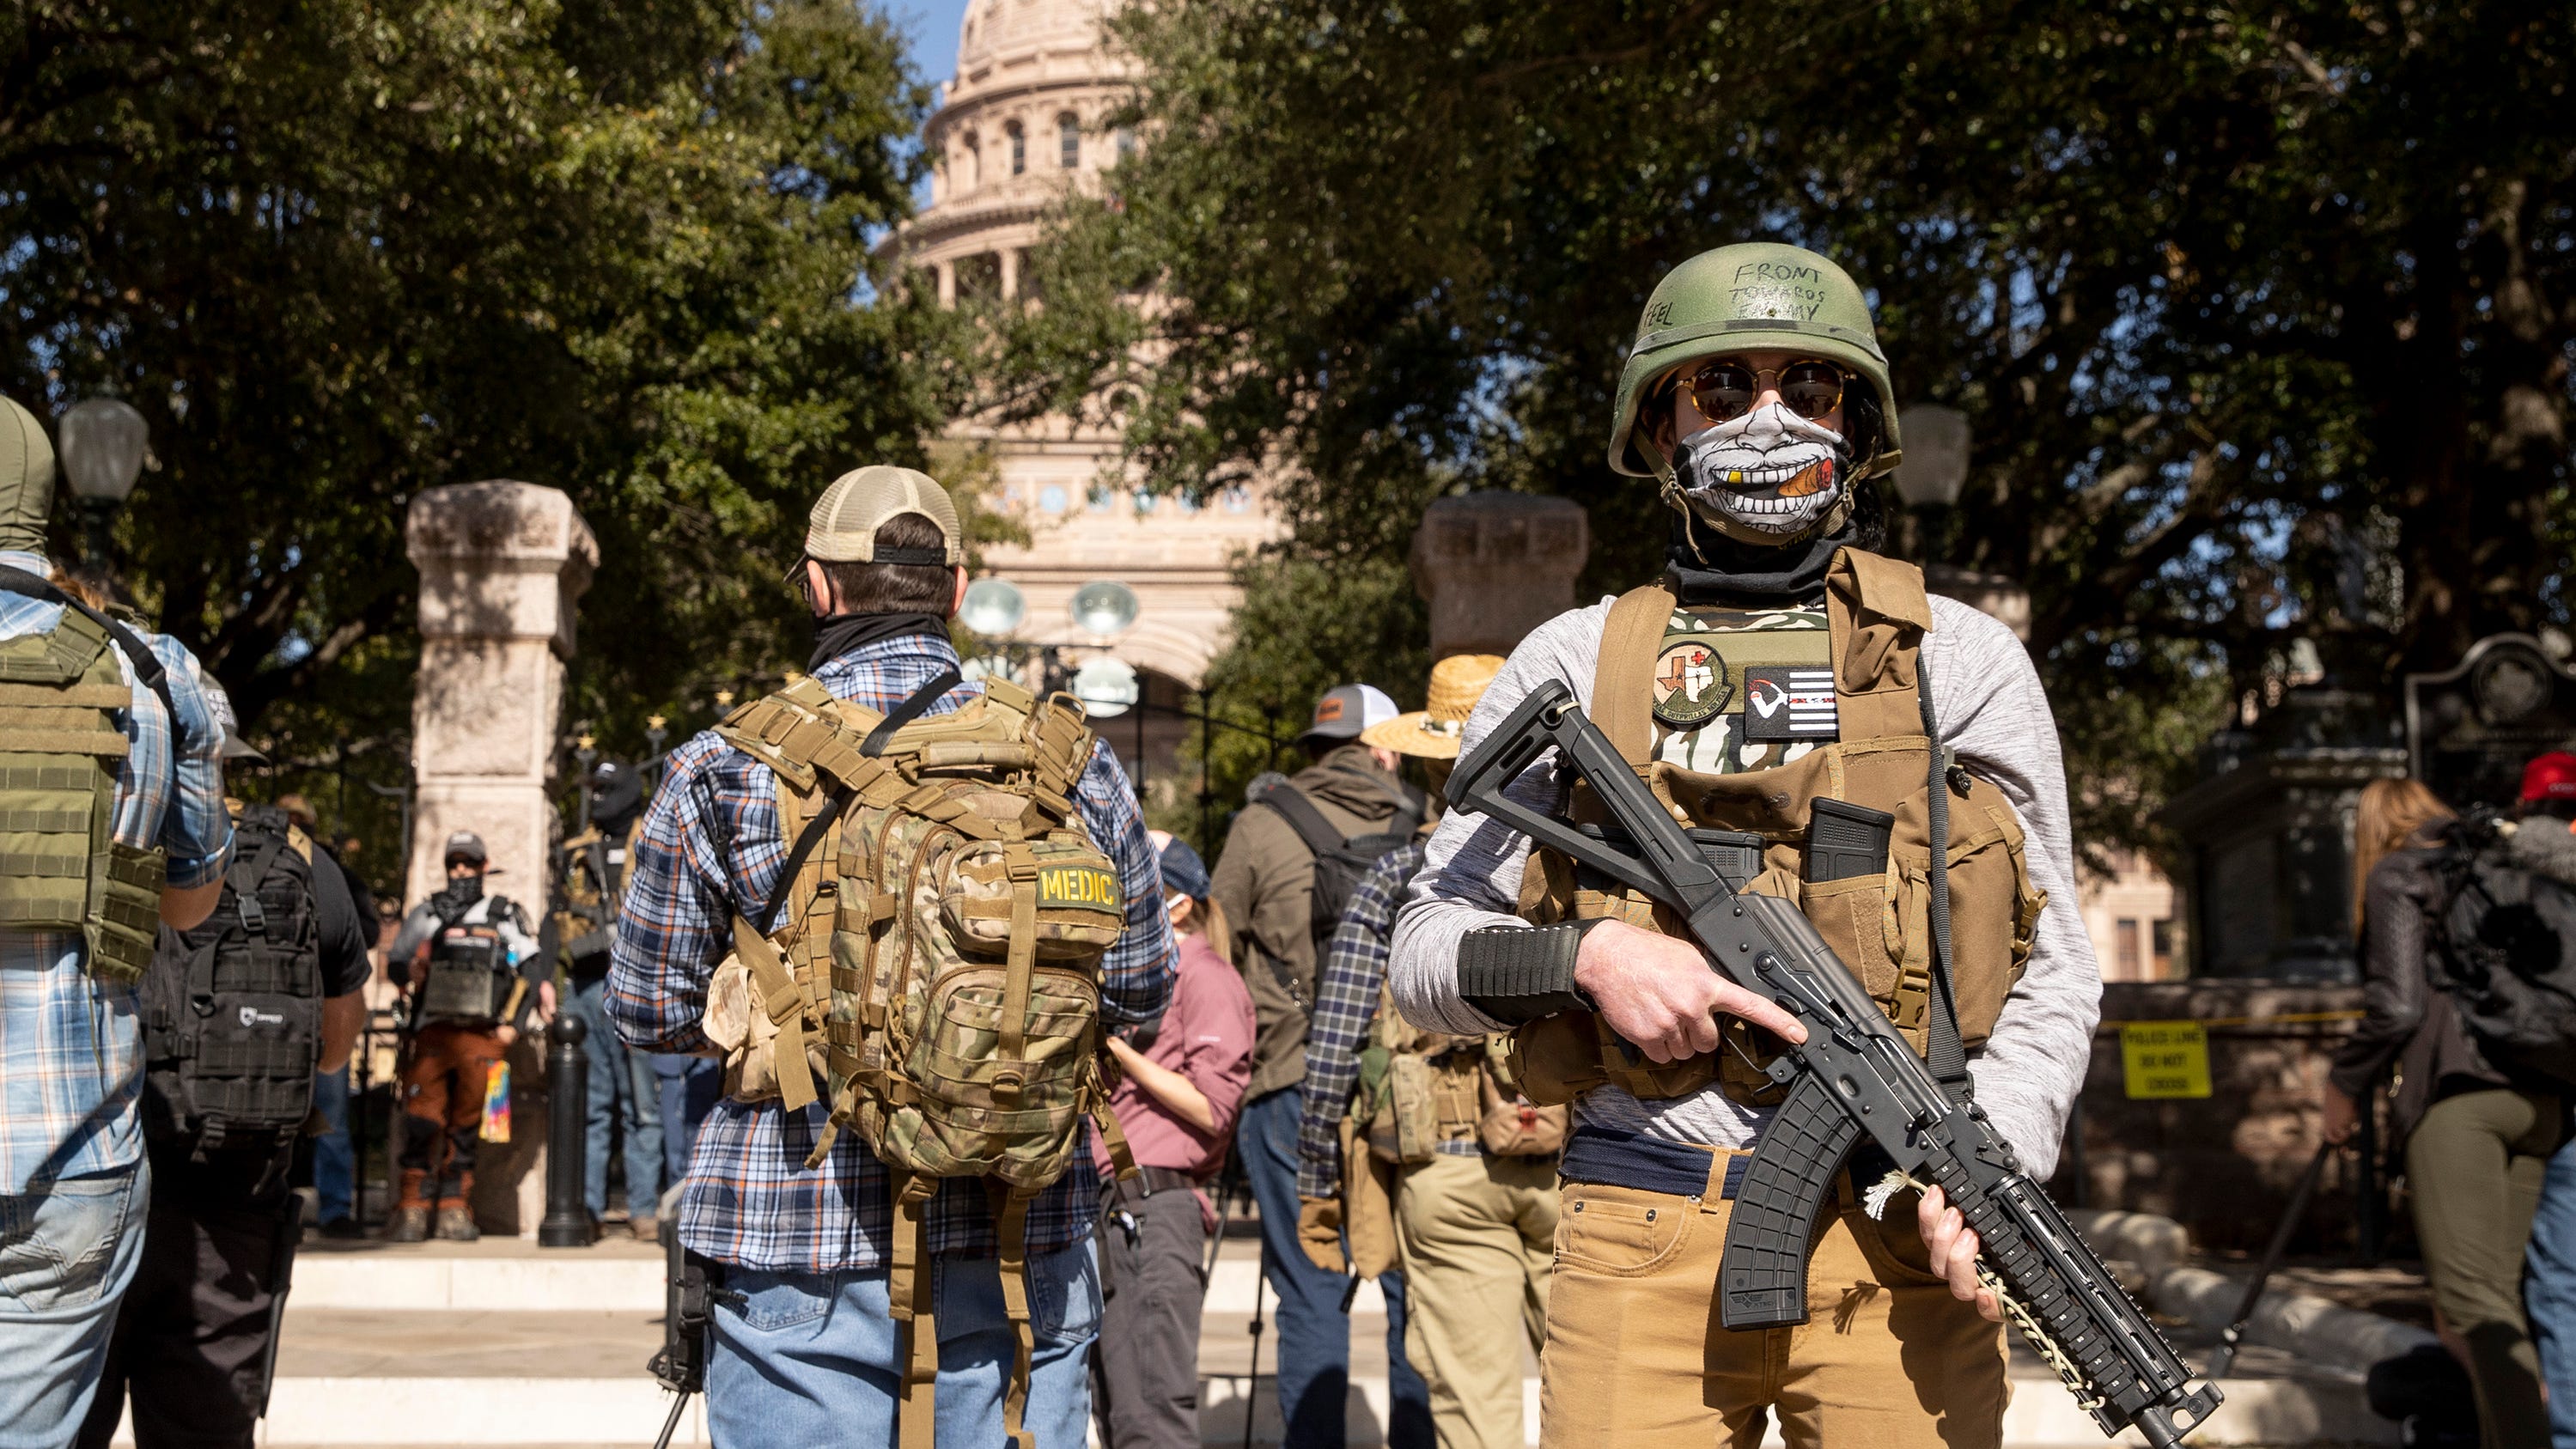 Armed protest at Texas Capitol in Austin Gun rights activists rally